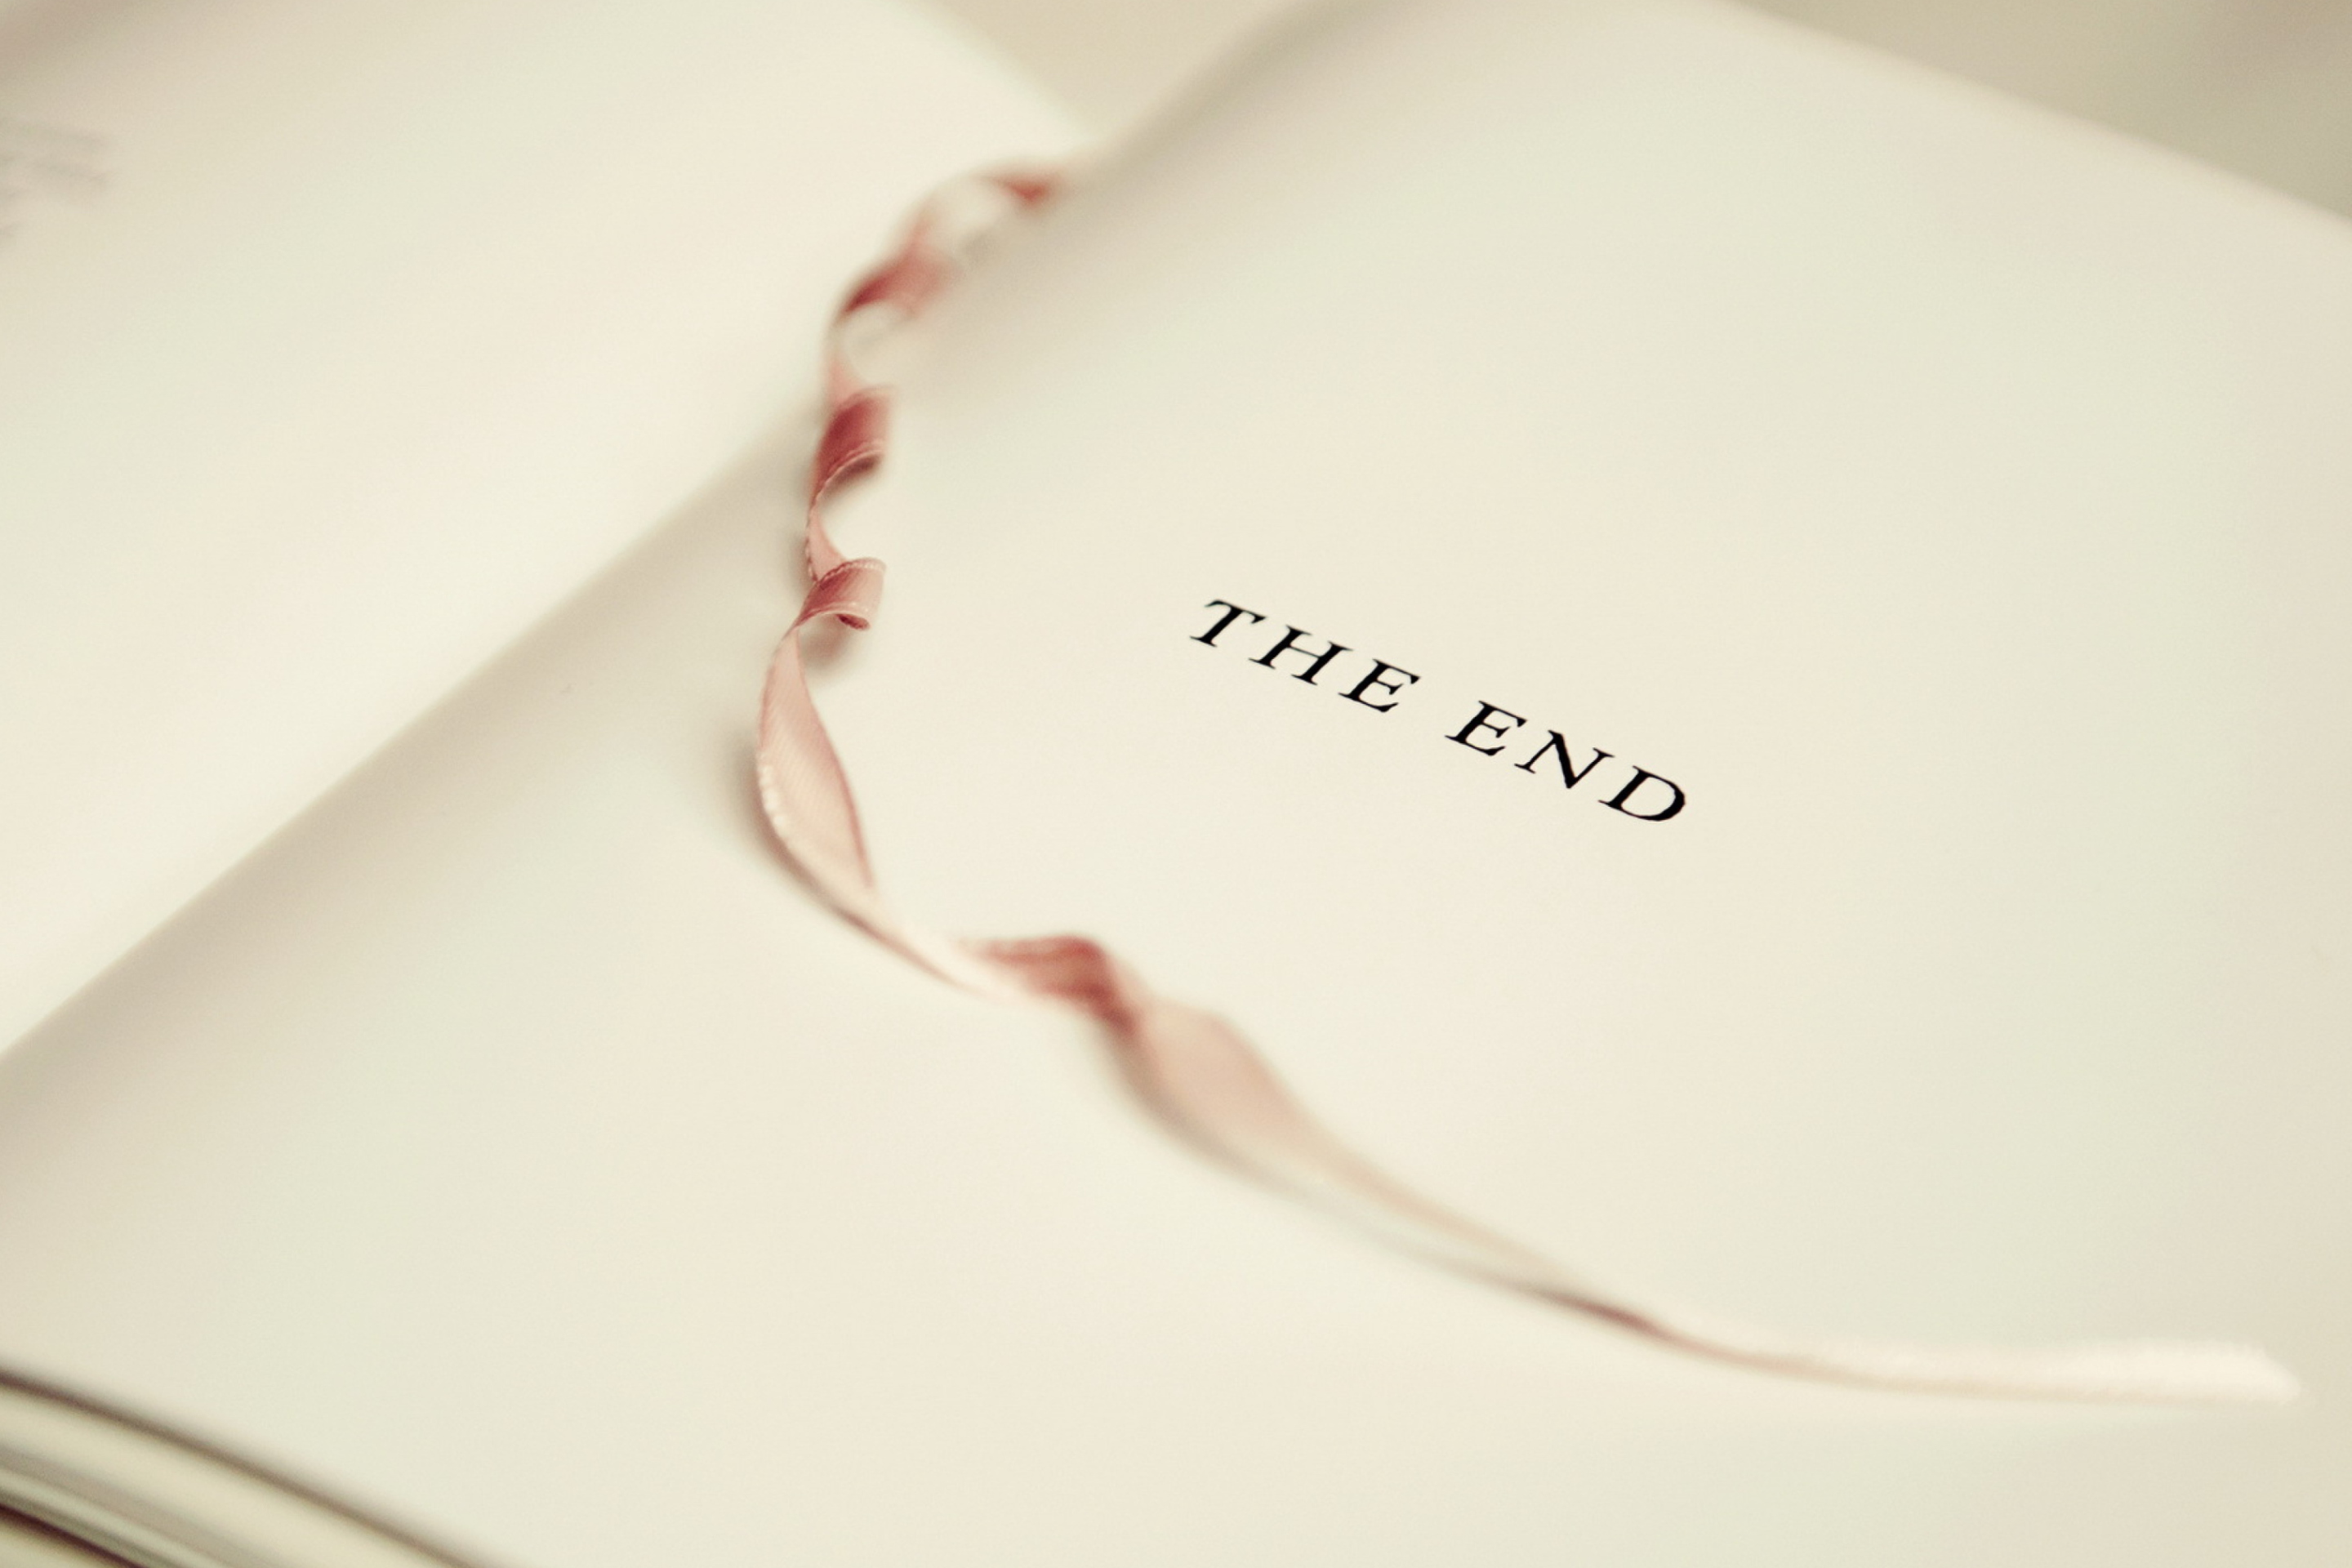 The End Of Book wallpaper 2880x1920